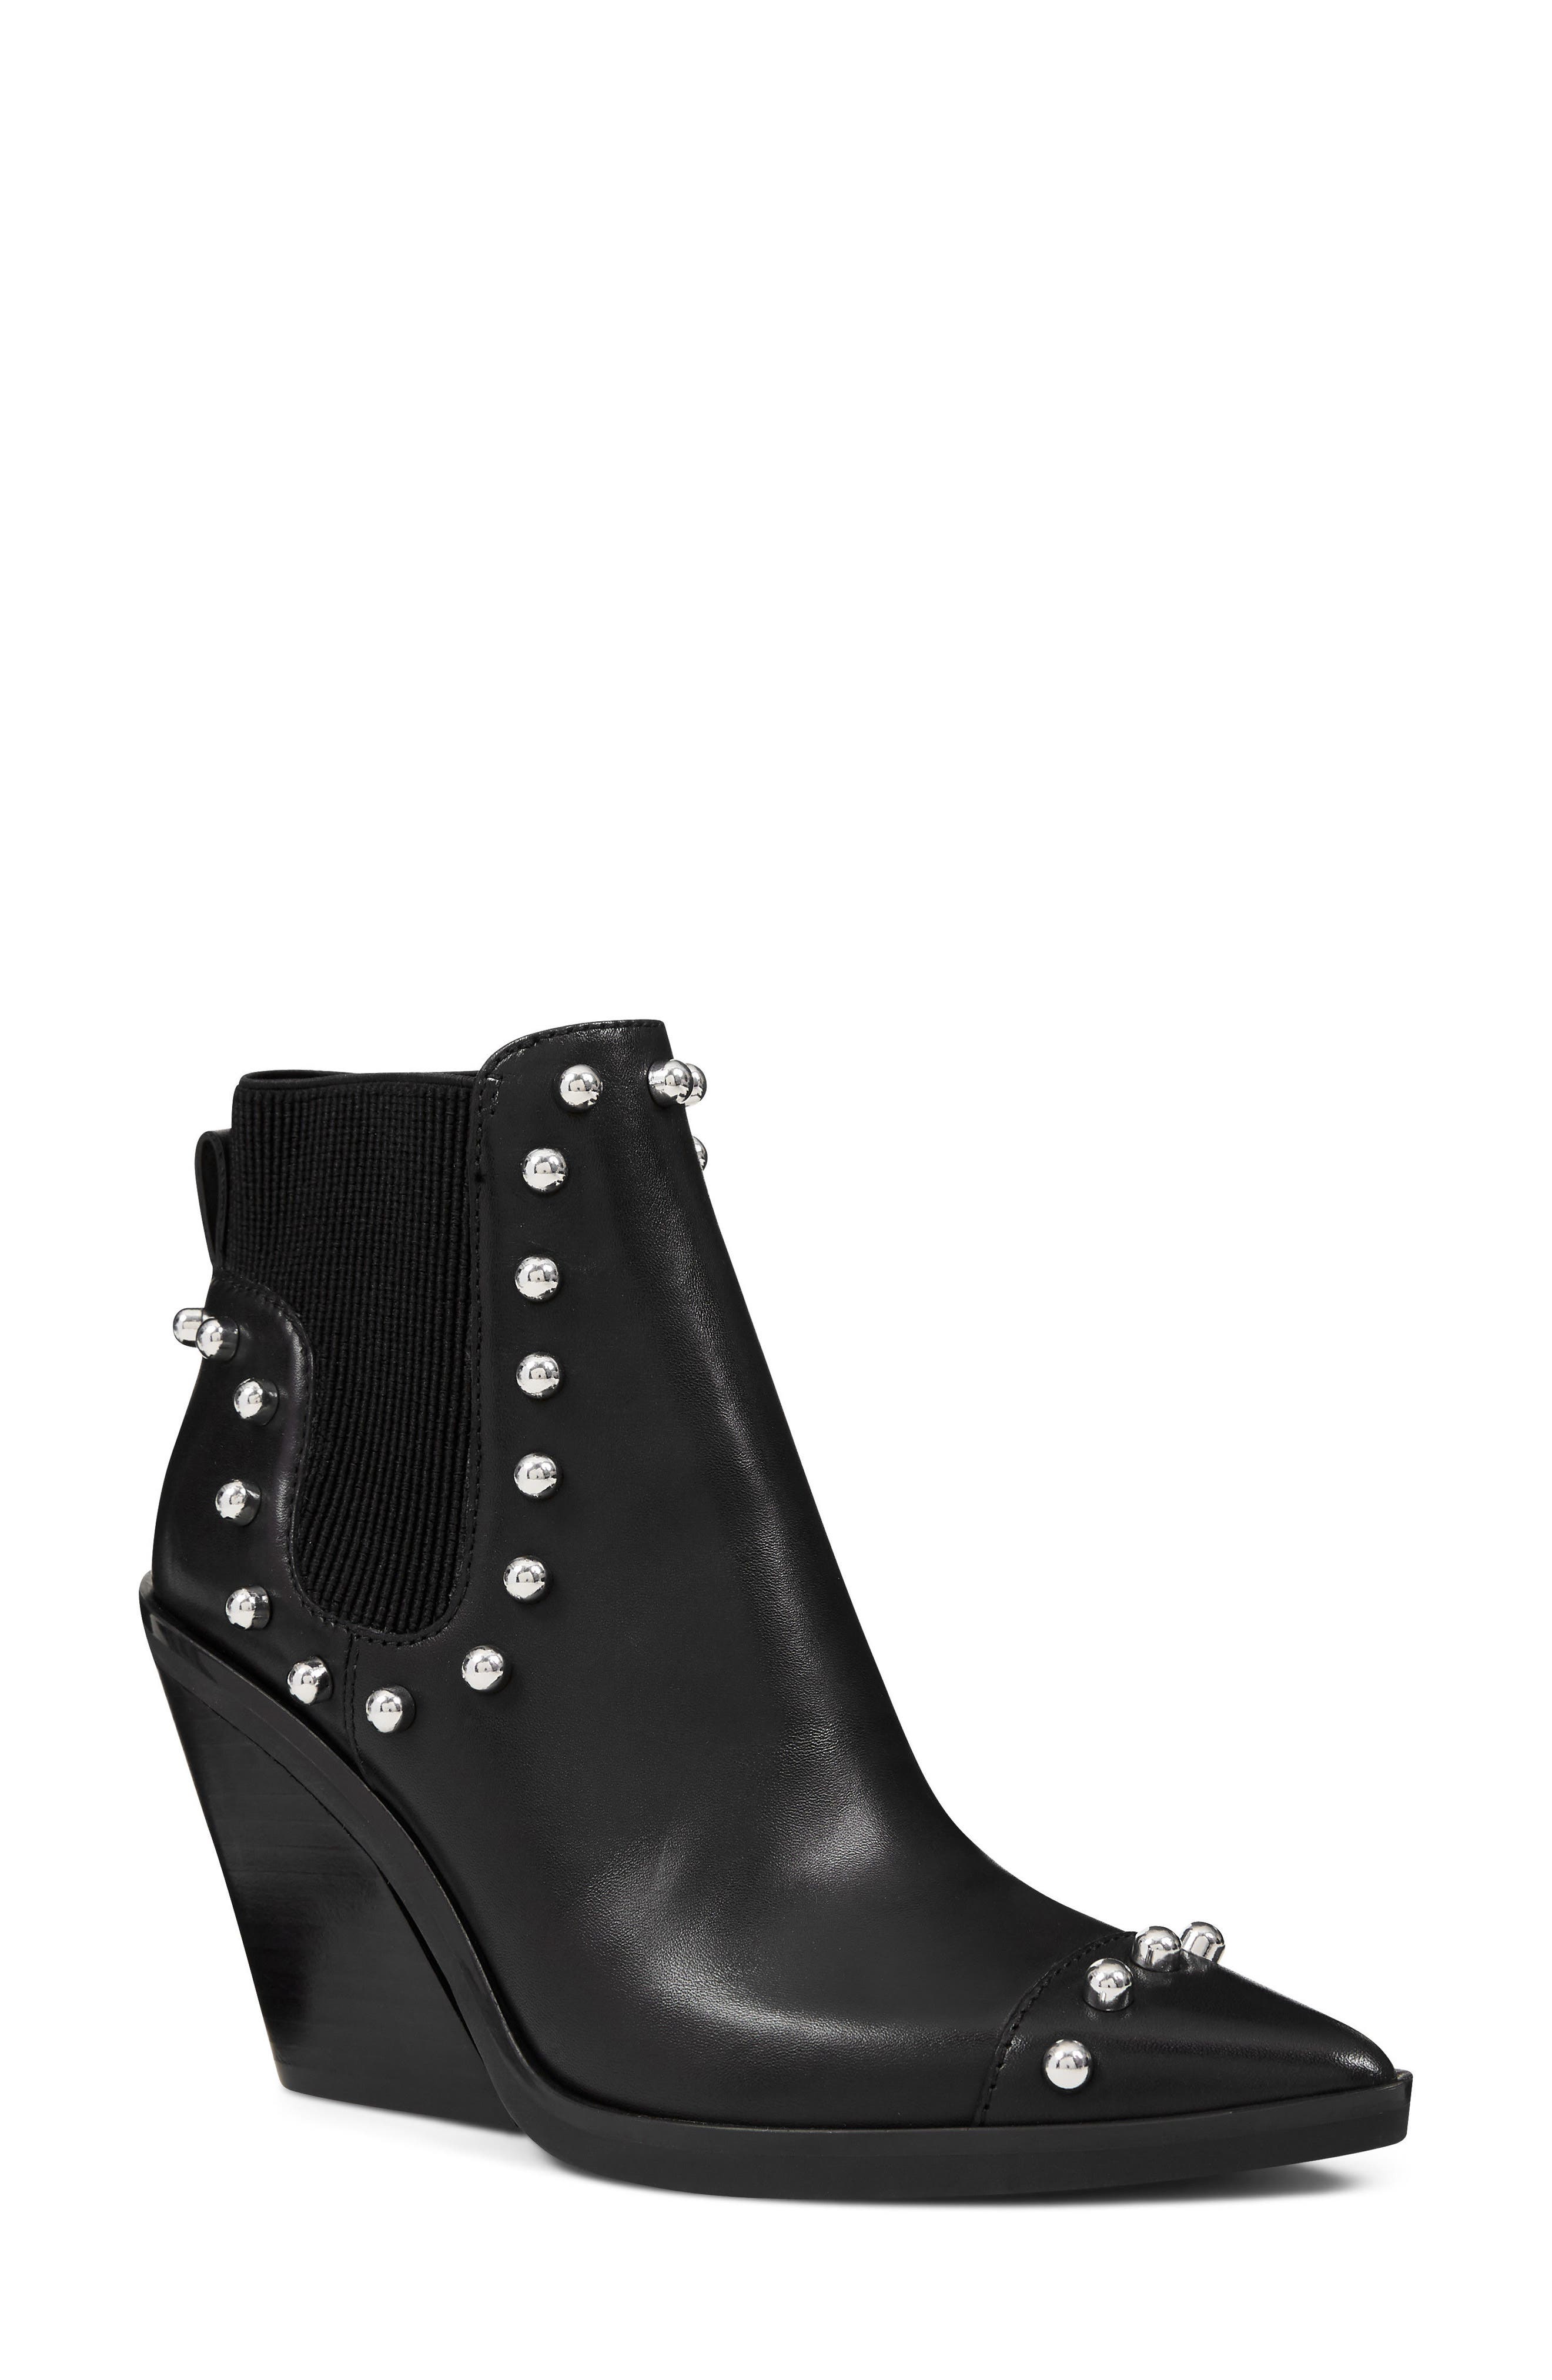 nordstrom studded booties